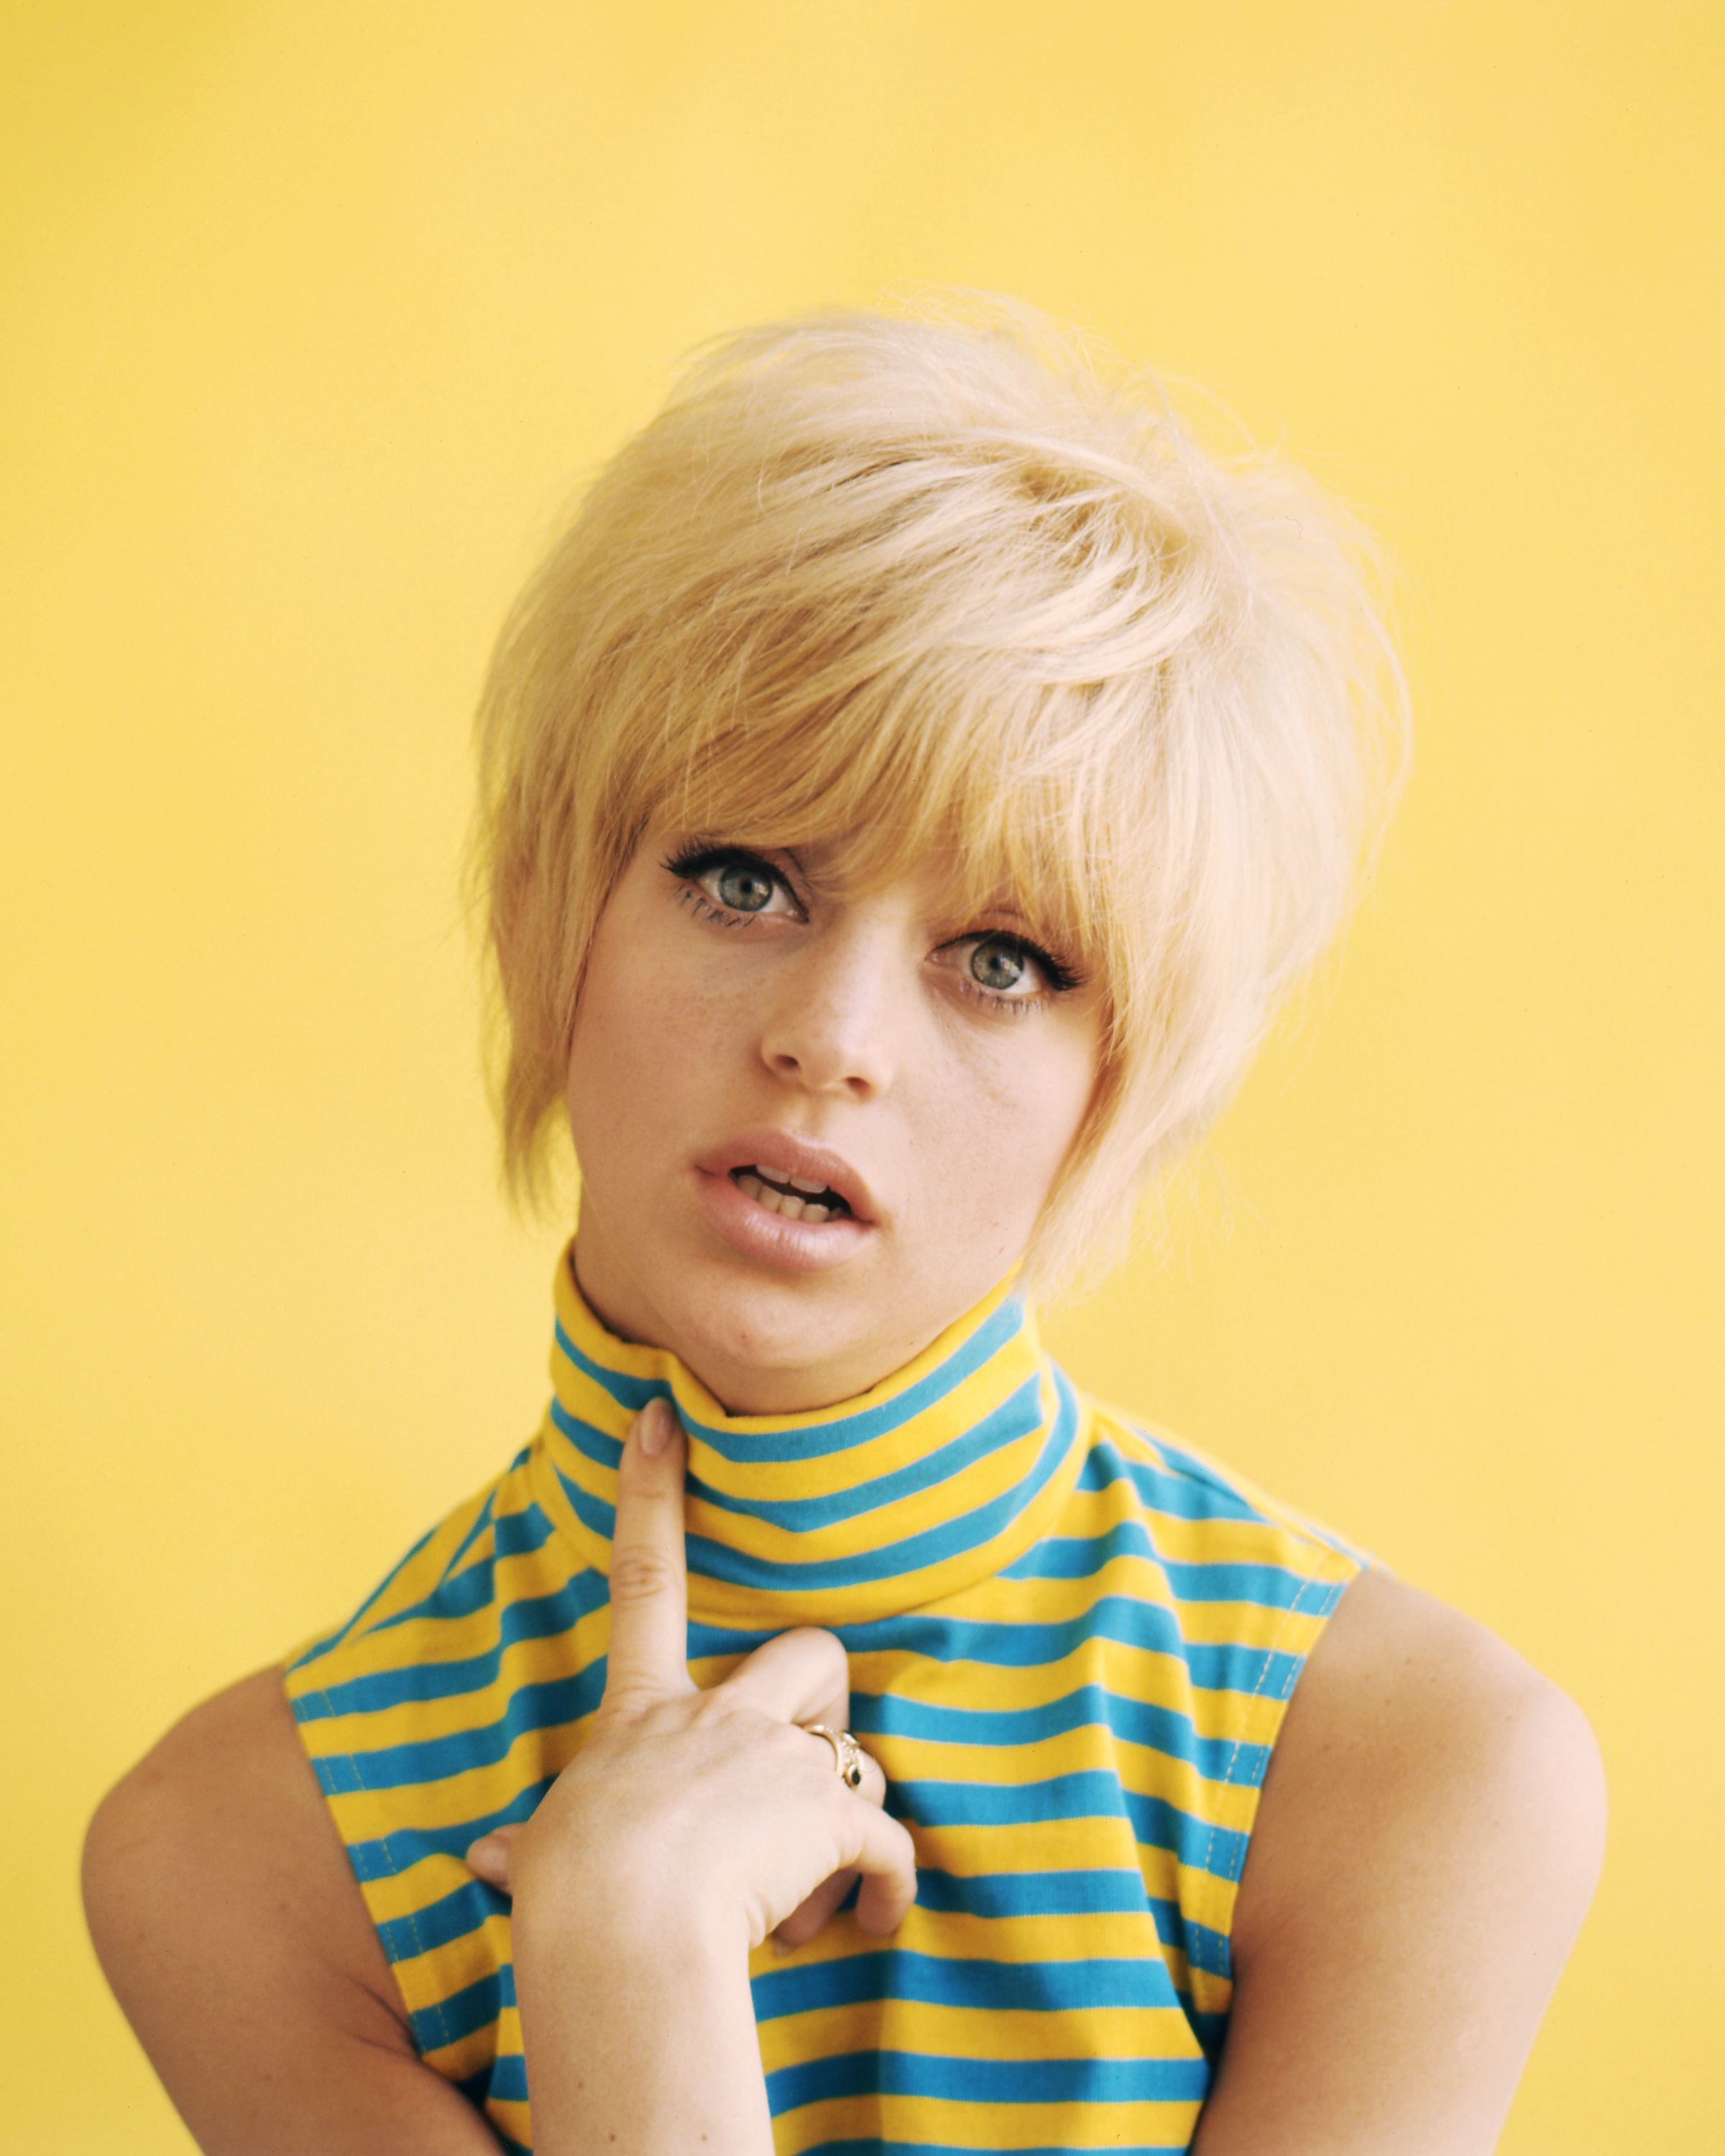 Goldie Hawn, circa 1965. | Source: Getty Images